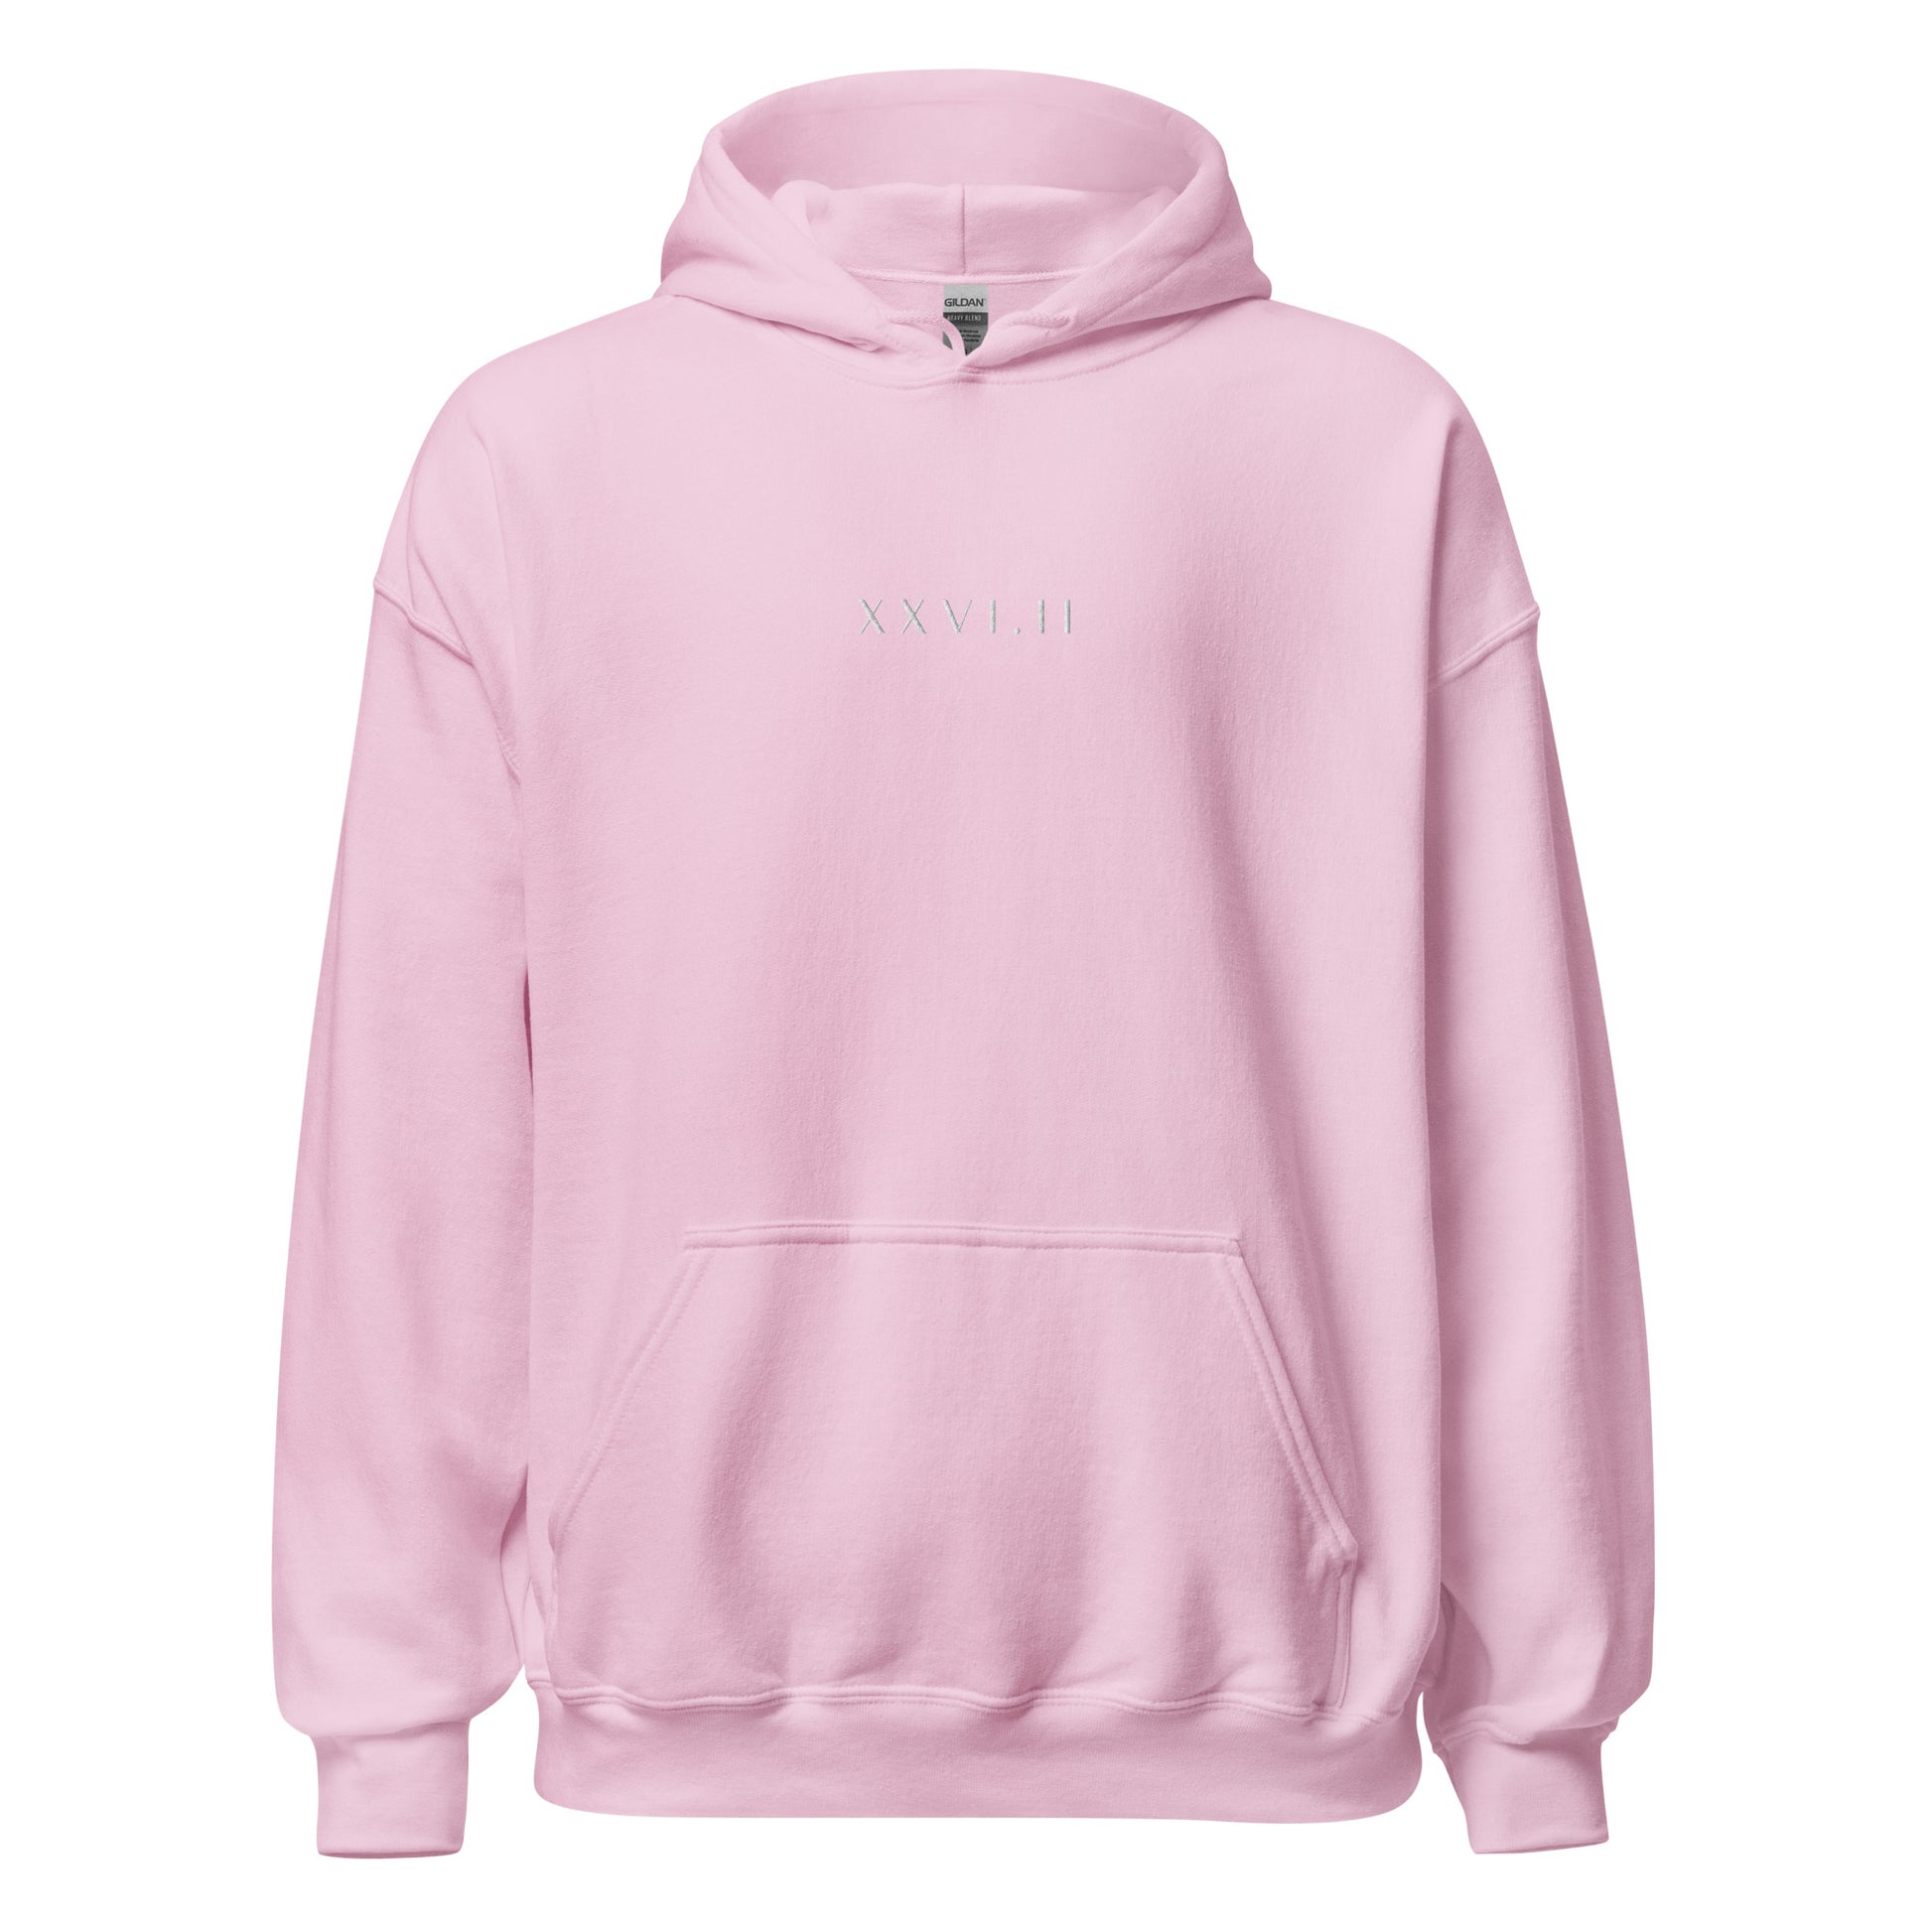 light pink hoodie with XXVI.II 26.2 marathon distance in roman numerals in a small, white font embroidered across the chest